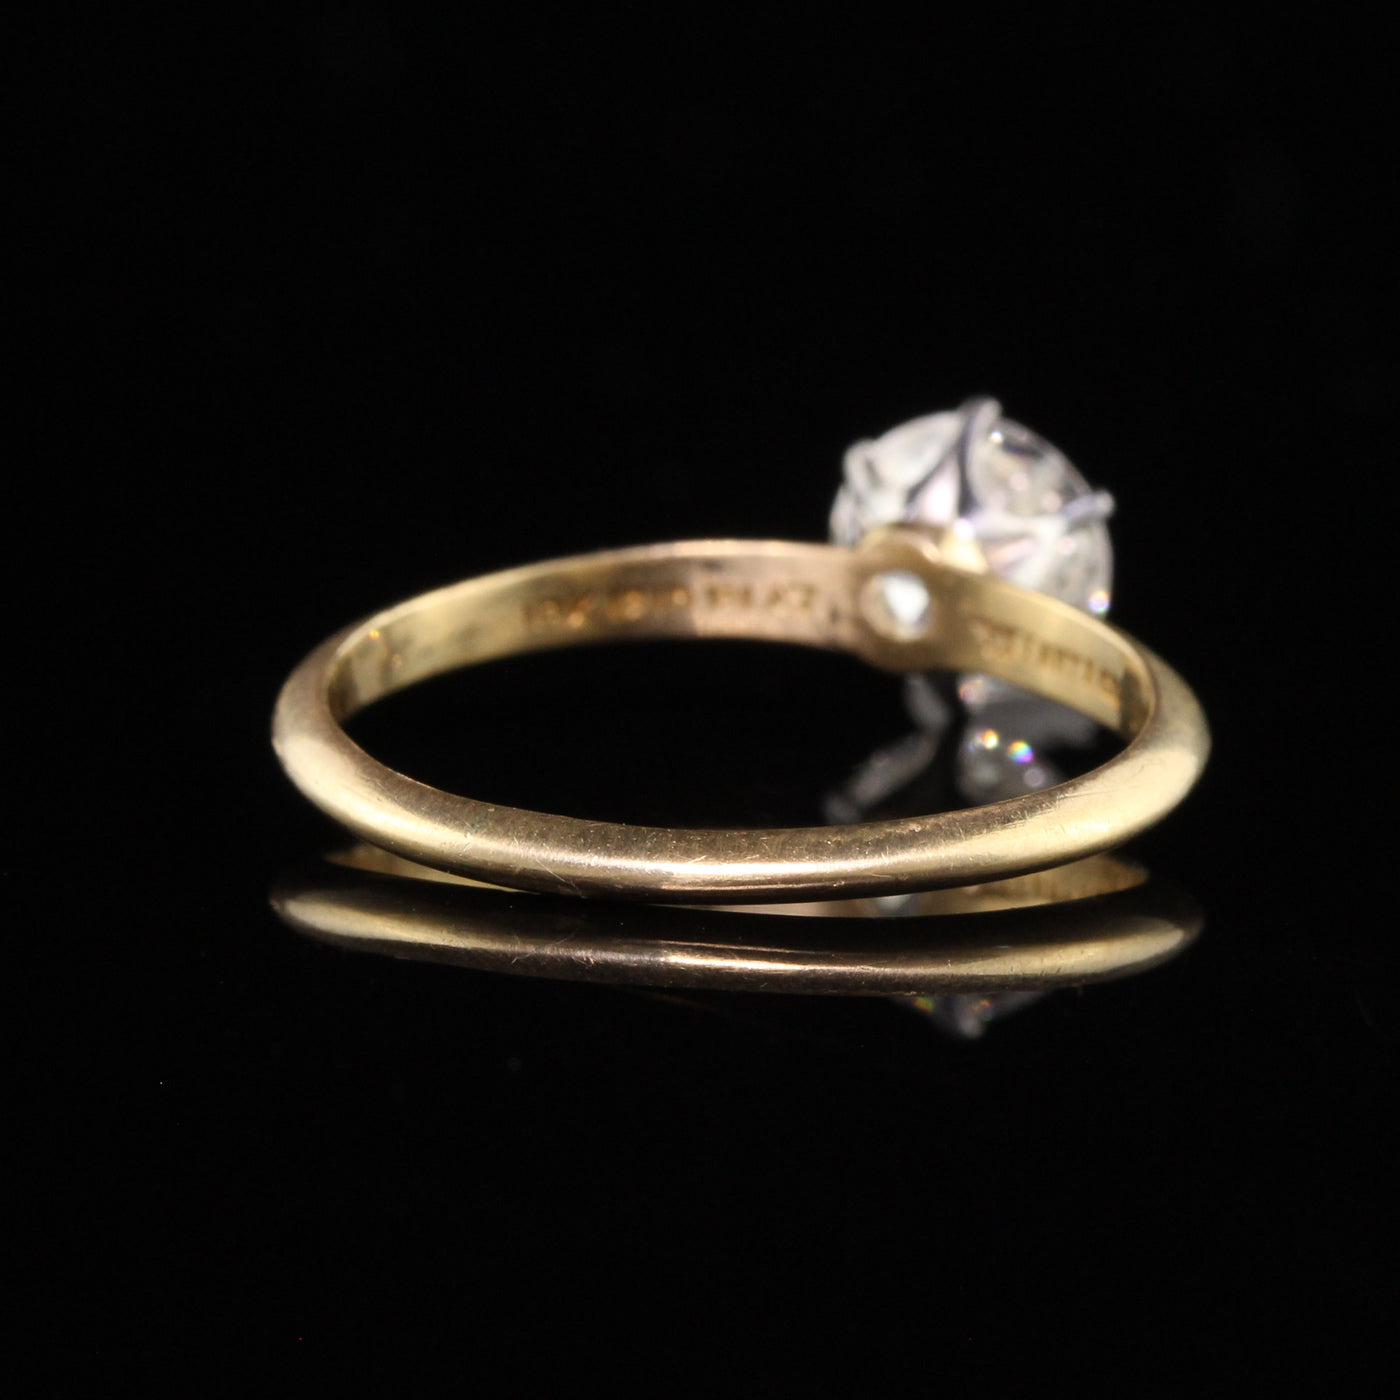 Antique Art Deco Tiffany and Co 18K Old European Diamond Engagement Ring - GIA